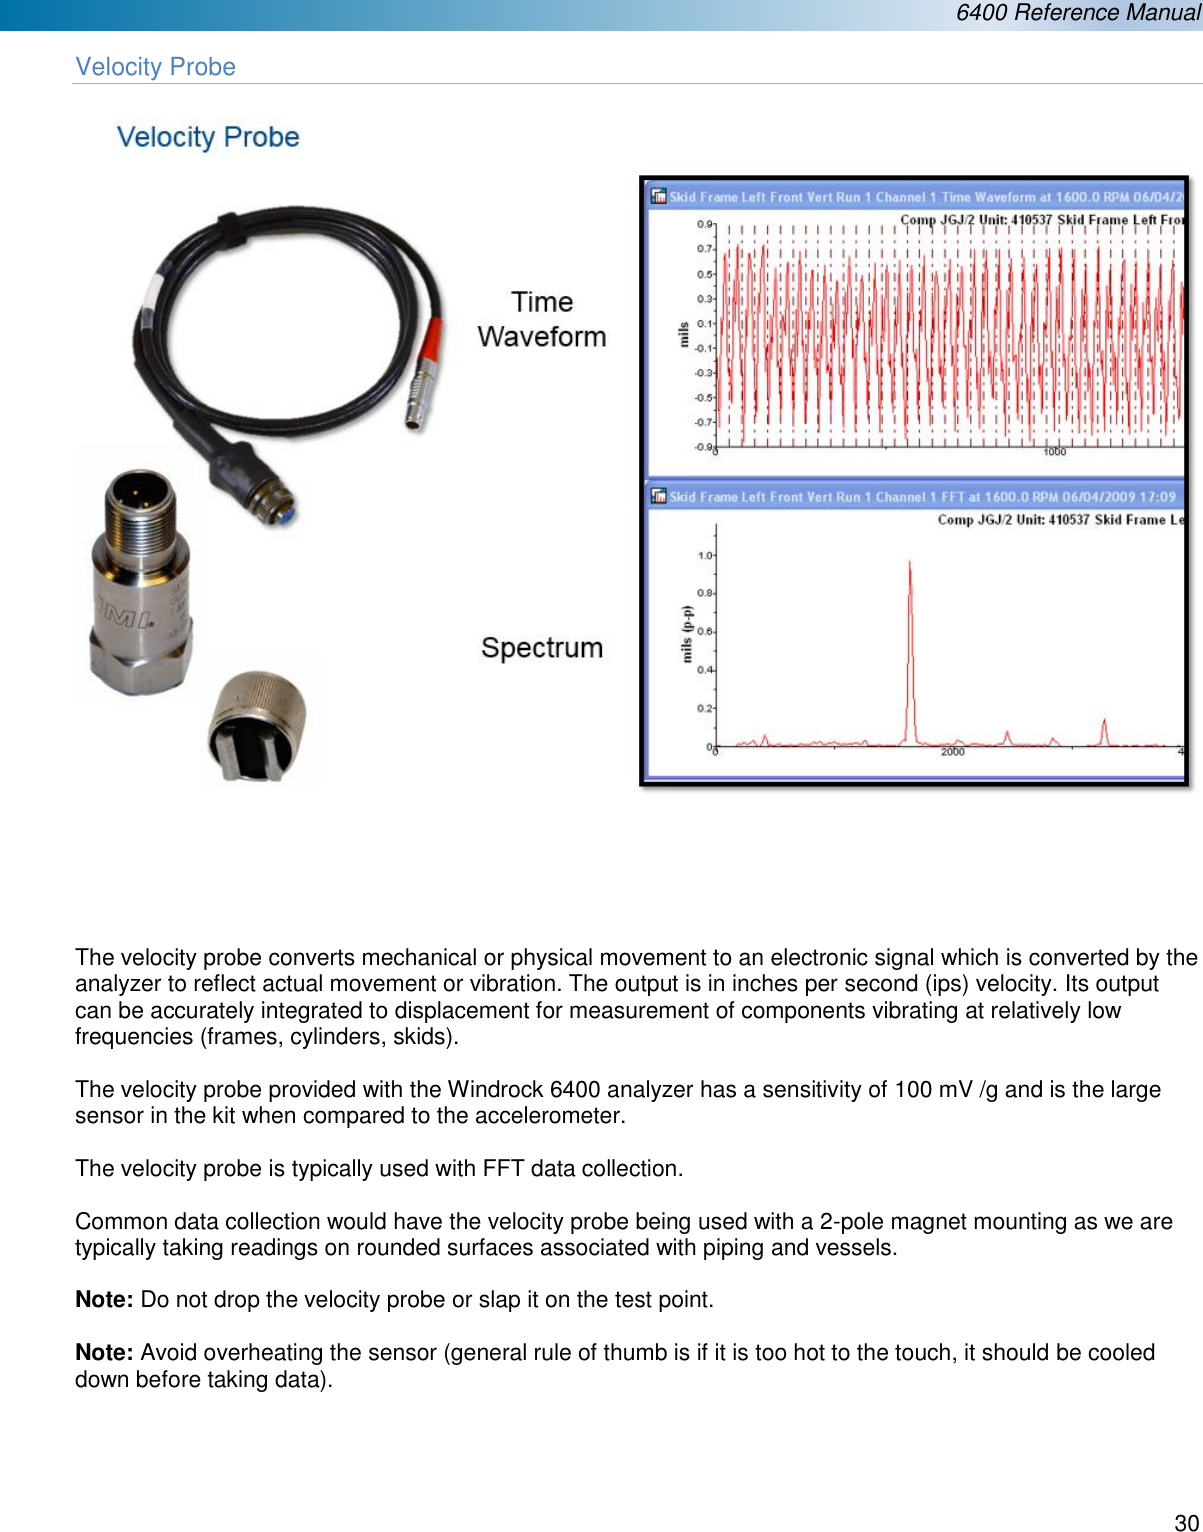  6400 Reference Manual  30  Velocity Probe        The velocity probe converts mechanical or physical movement to an electronic signal which is converted by the analyzer to reflect actual movement or vibration. The output is in inches per second (ips) velocity. Its output can be accurately integrated to displacement for measurement of components vibrating at relatively low frequencies (frames, cylinders, skids).      The velocity probe provided with the Windrock 6400 analyzer has a sensitivity of 100 mV /g and is the large sensor in the kit when compared to the accelerometer.  The velocity probe is typically used with FFT data collection.    Common data collection would have the velocity probe being used with a 2-pole magnet mounting as we are typically taking readings on rounded surfaces associated with piping and vessels.   Note: Do not drop the velocity probe or slap it on the test point.  Note: Avoid overheating the sensor (general rule of thumb is if it is too hot to the touch, it should be cooled down before taking data).    